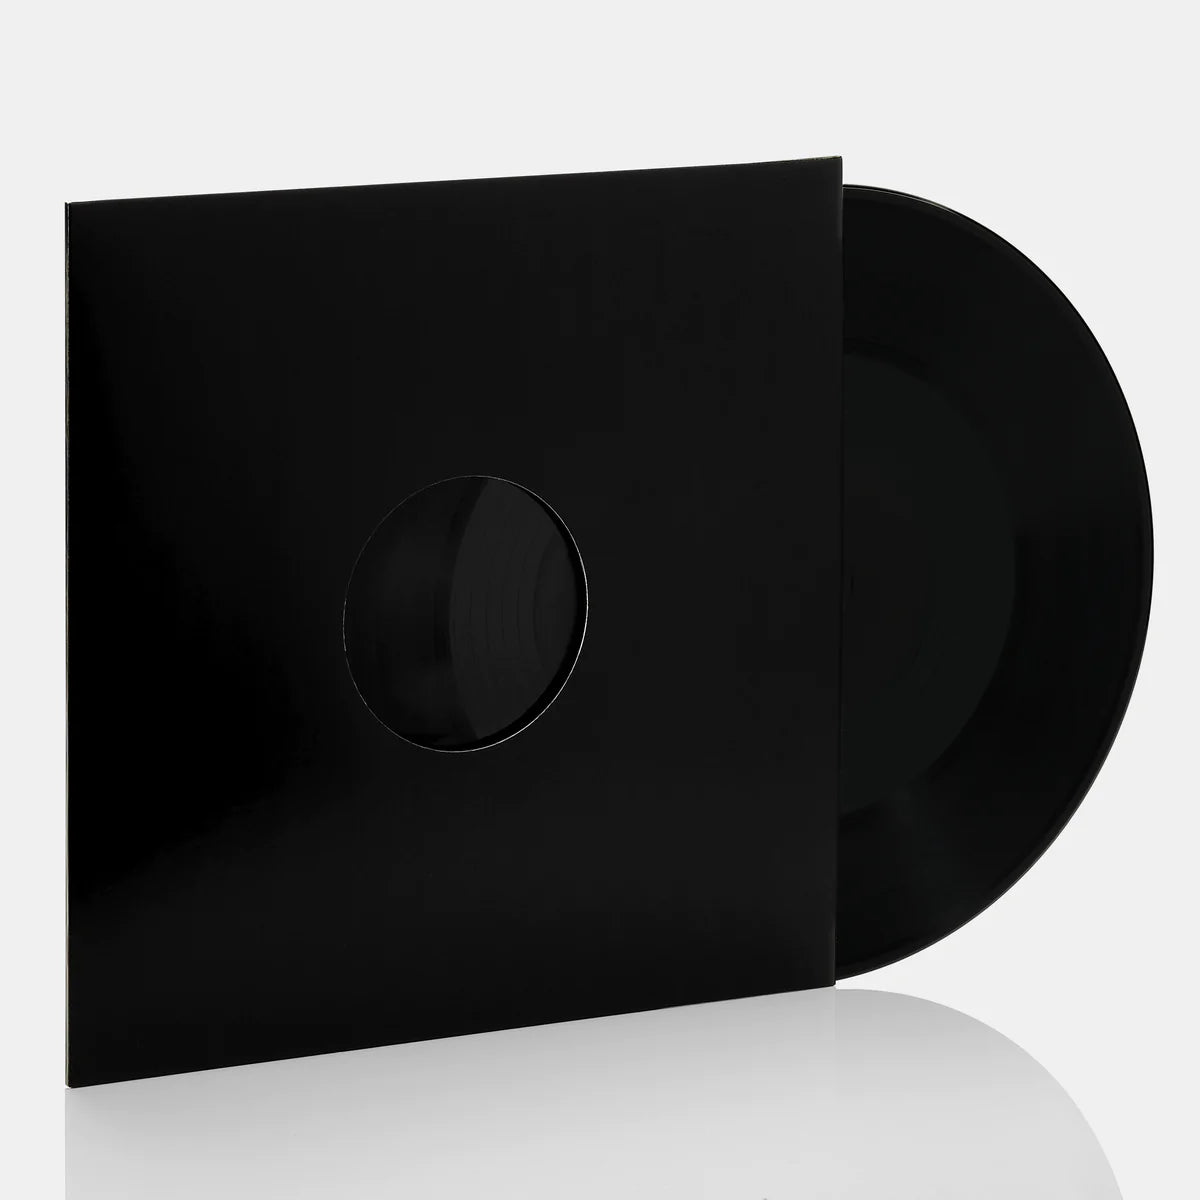 Burial + Four Tet + Thom Yorke – Her Revolution / His Rope 12"